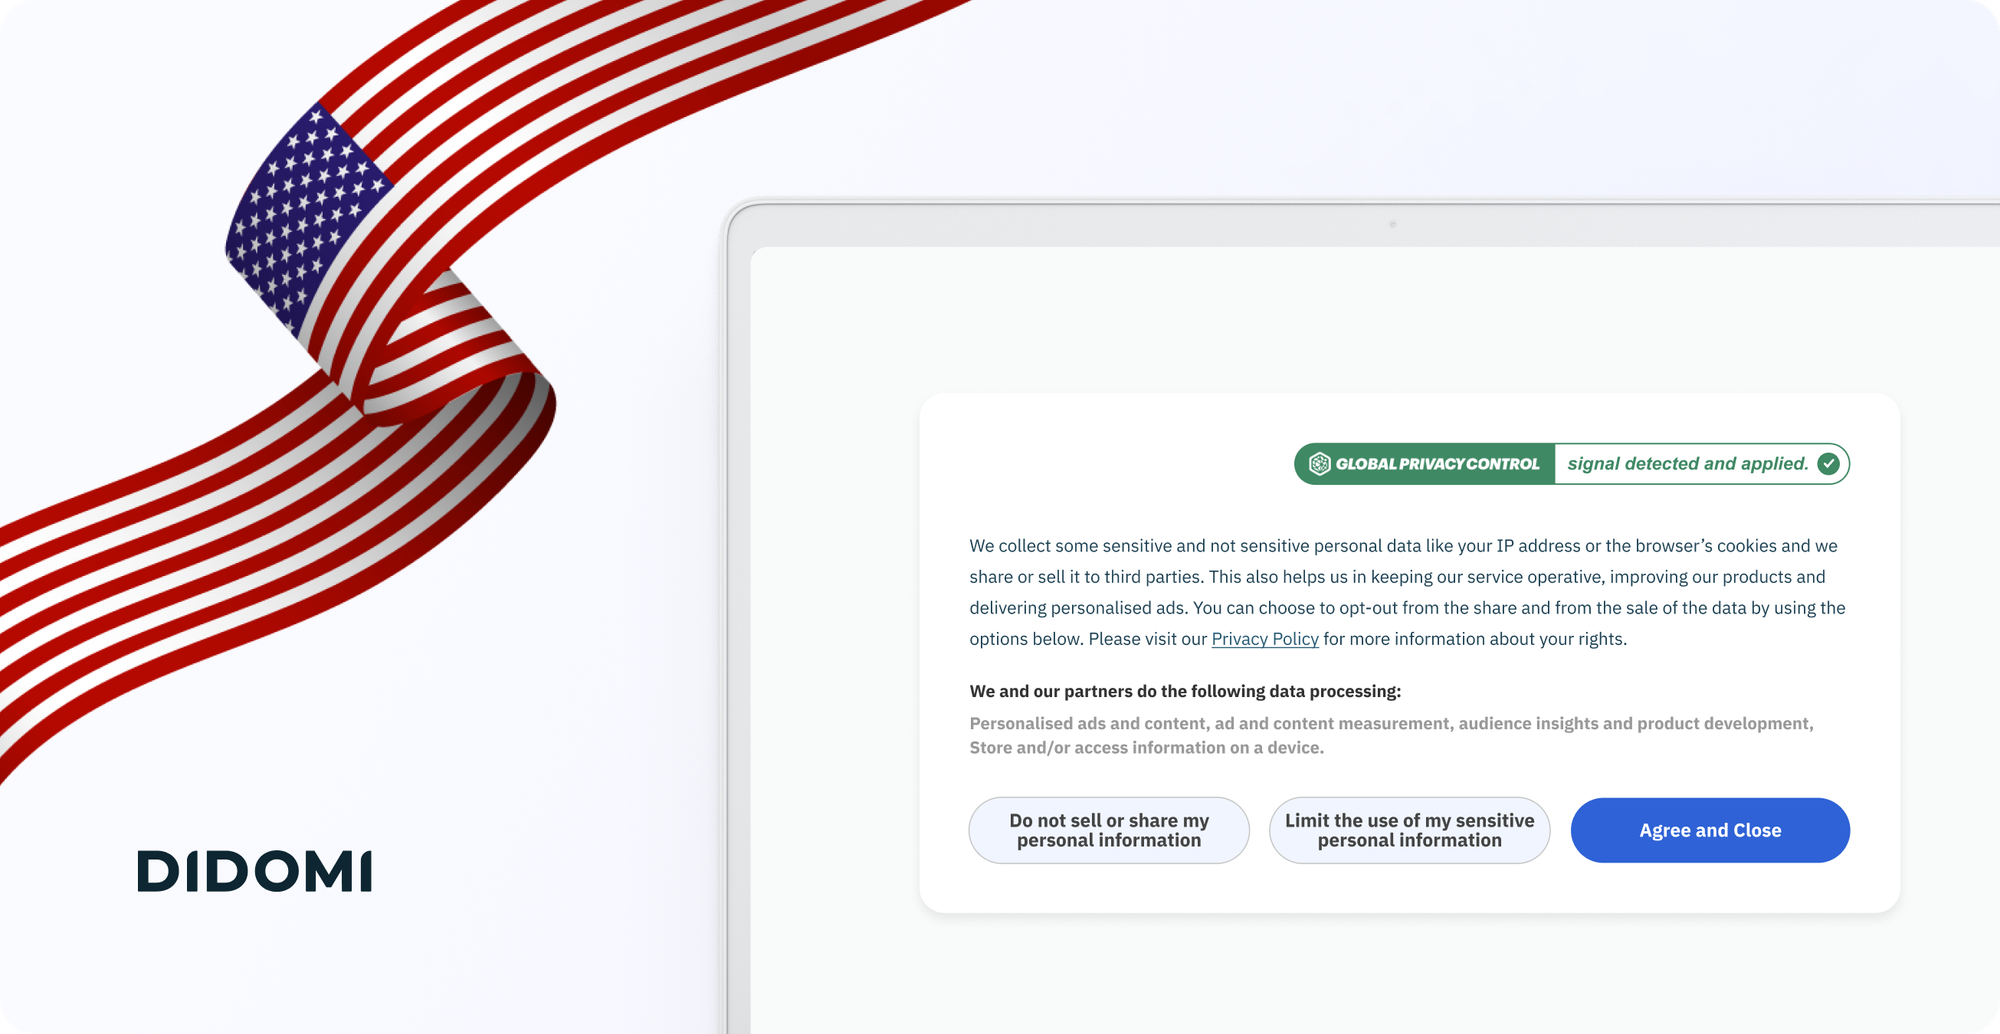 Mockup of a consent banner presenting various option to users, including "do not sell or share my personal information", "limit the use of my sensitive personal infromation", and "agree and close", along with a label "Global Privacy Control signal detected and applied". On the left side of the image, an american flag.